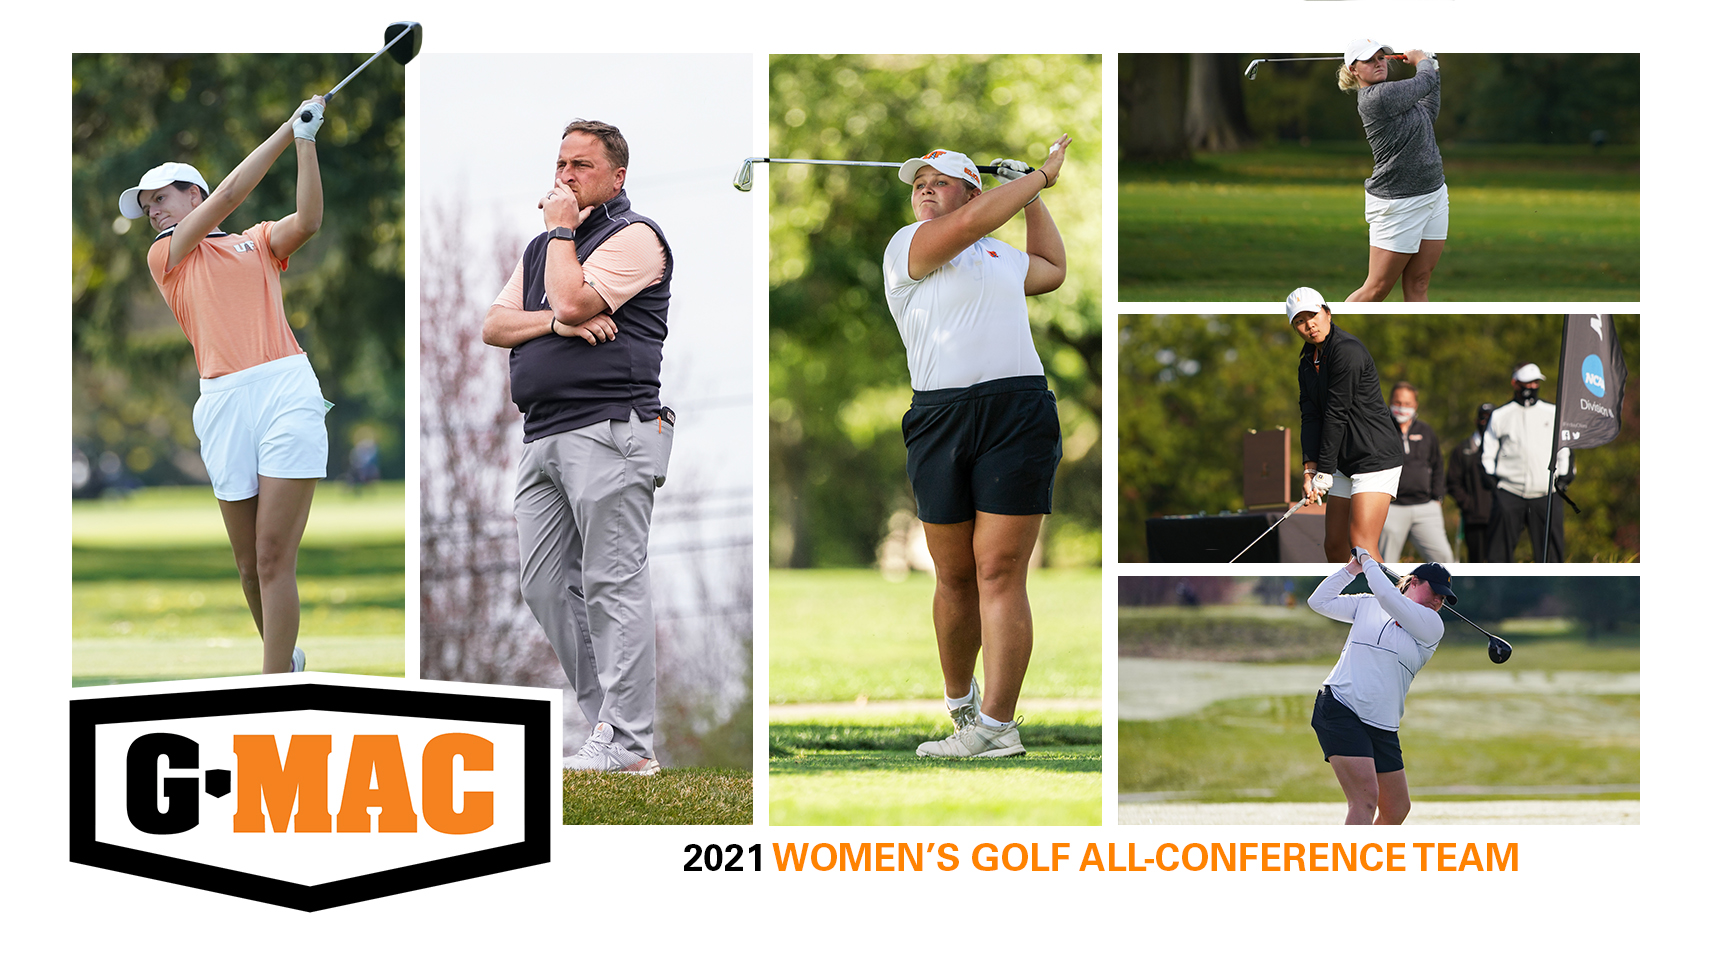 Women's golf all-conference team